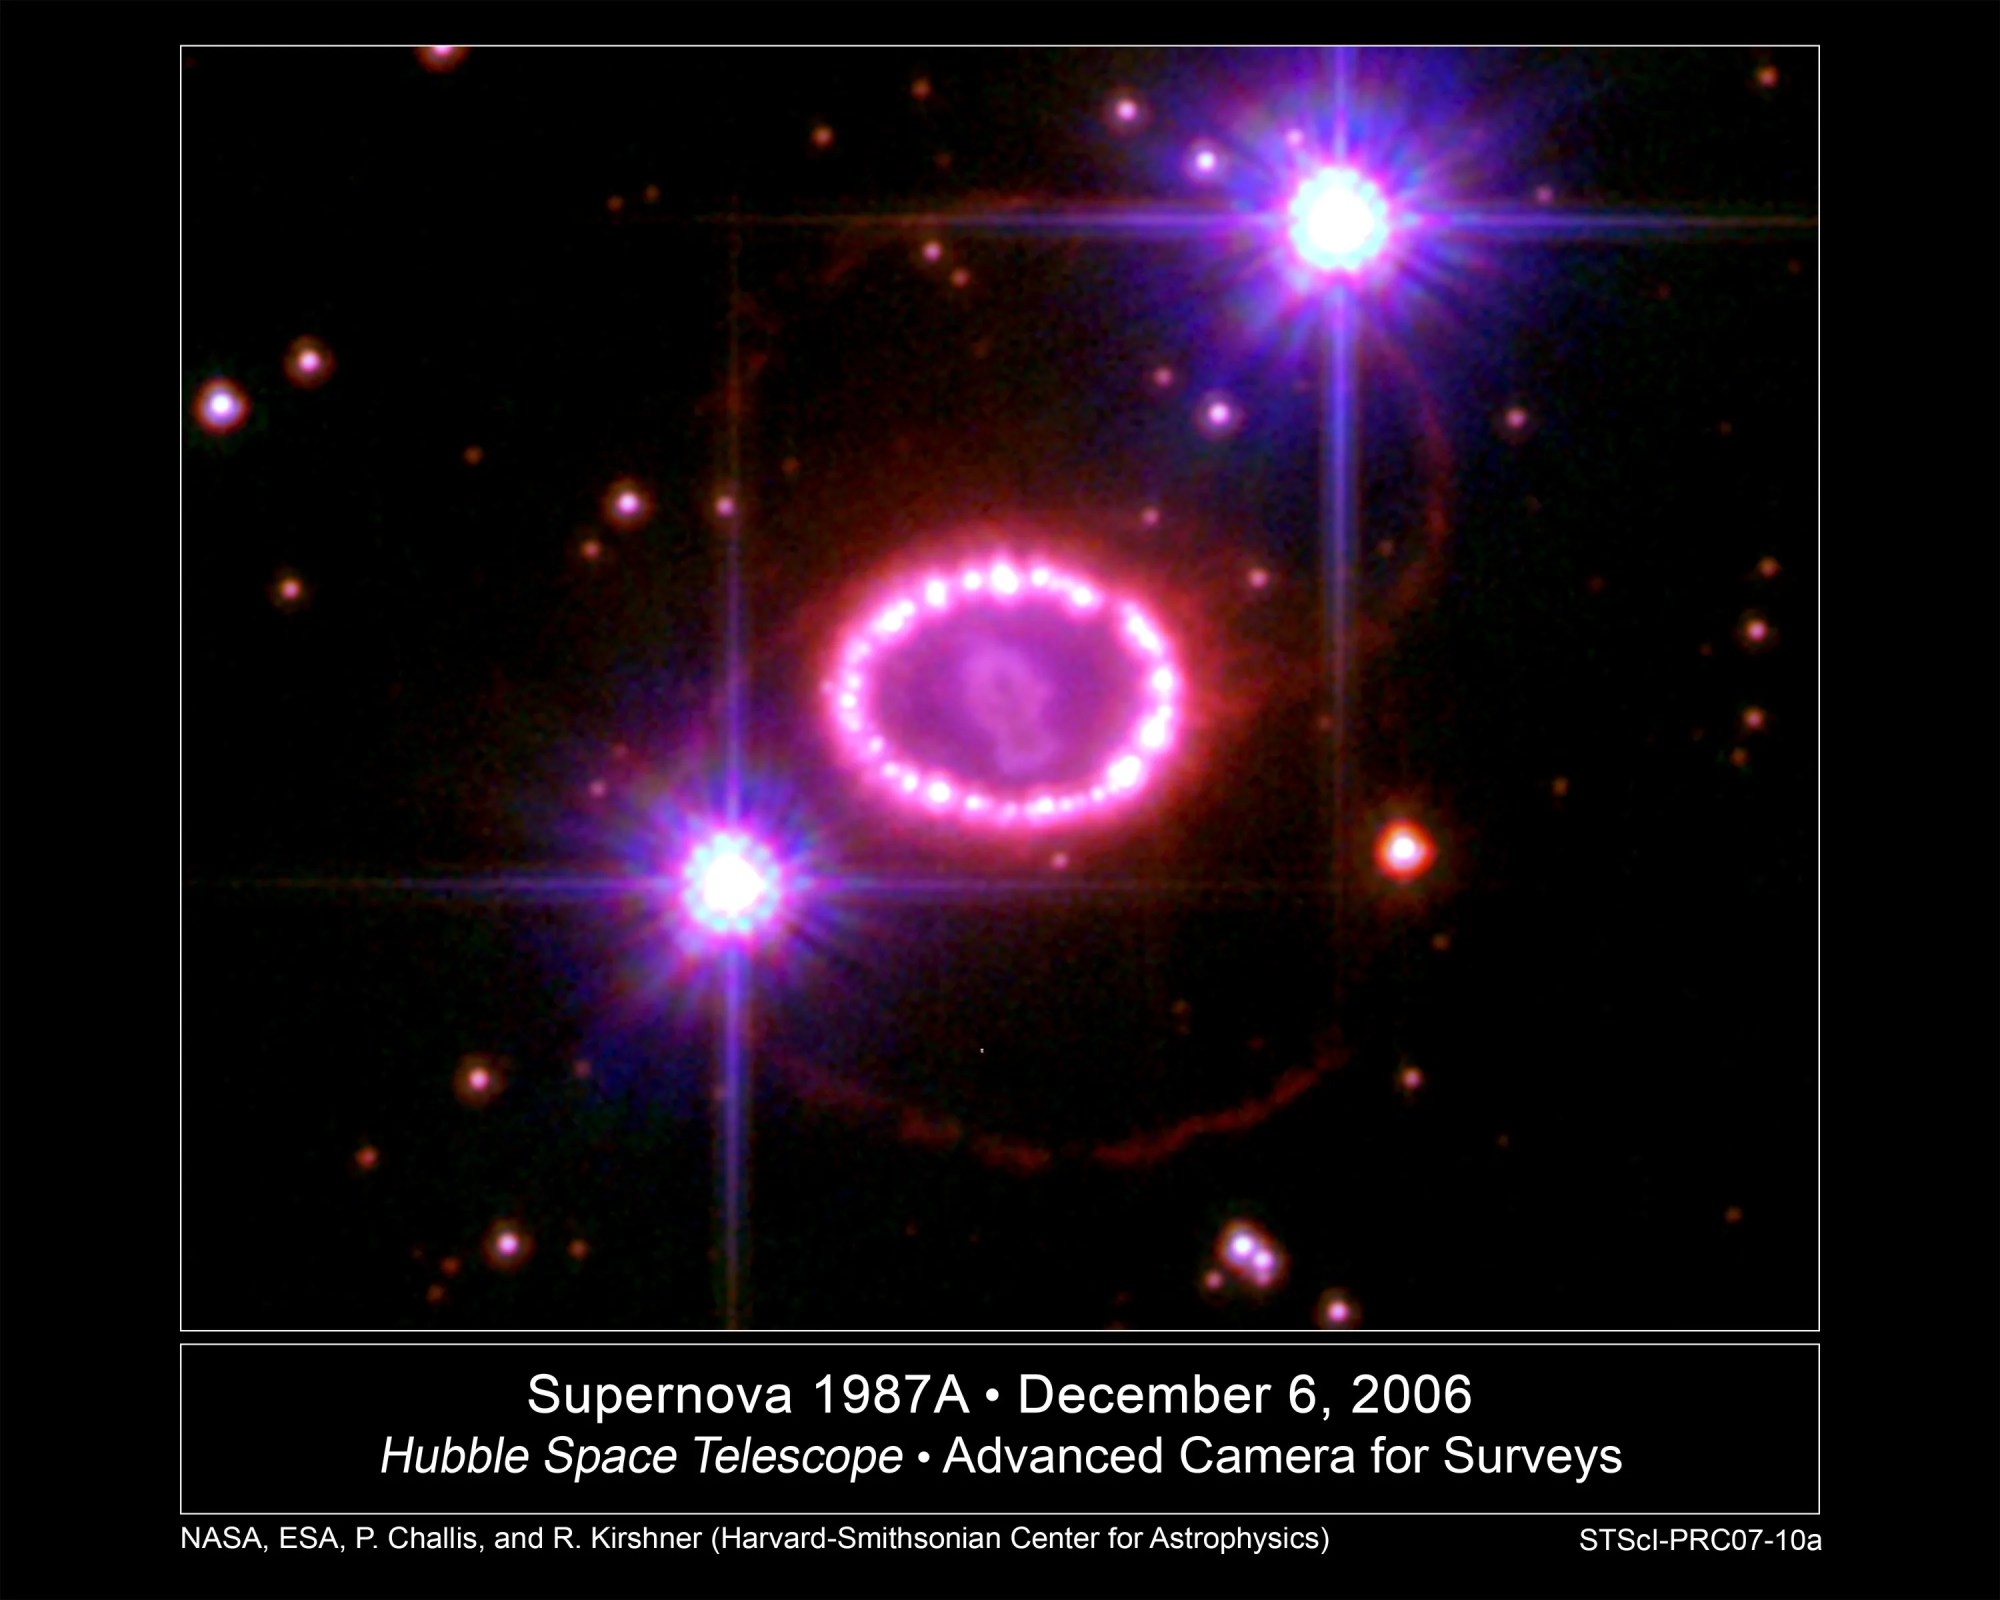 A string of pinkish pearls surrounds an exploded star. Black background dotted with stars. Two bright stars, with diffraction spikes, at lower left and upper right of the ring.